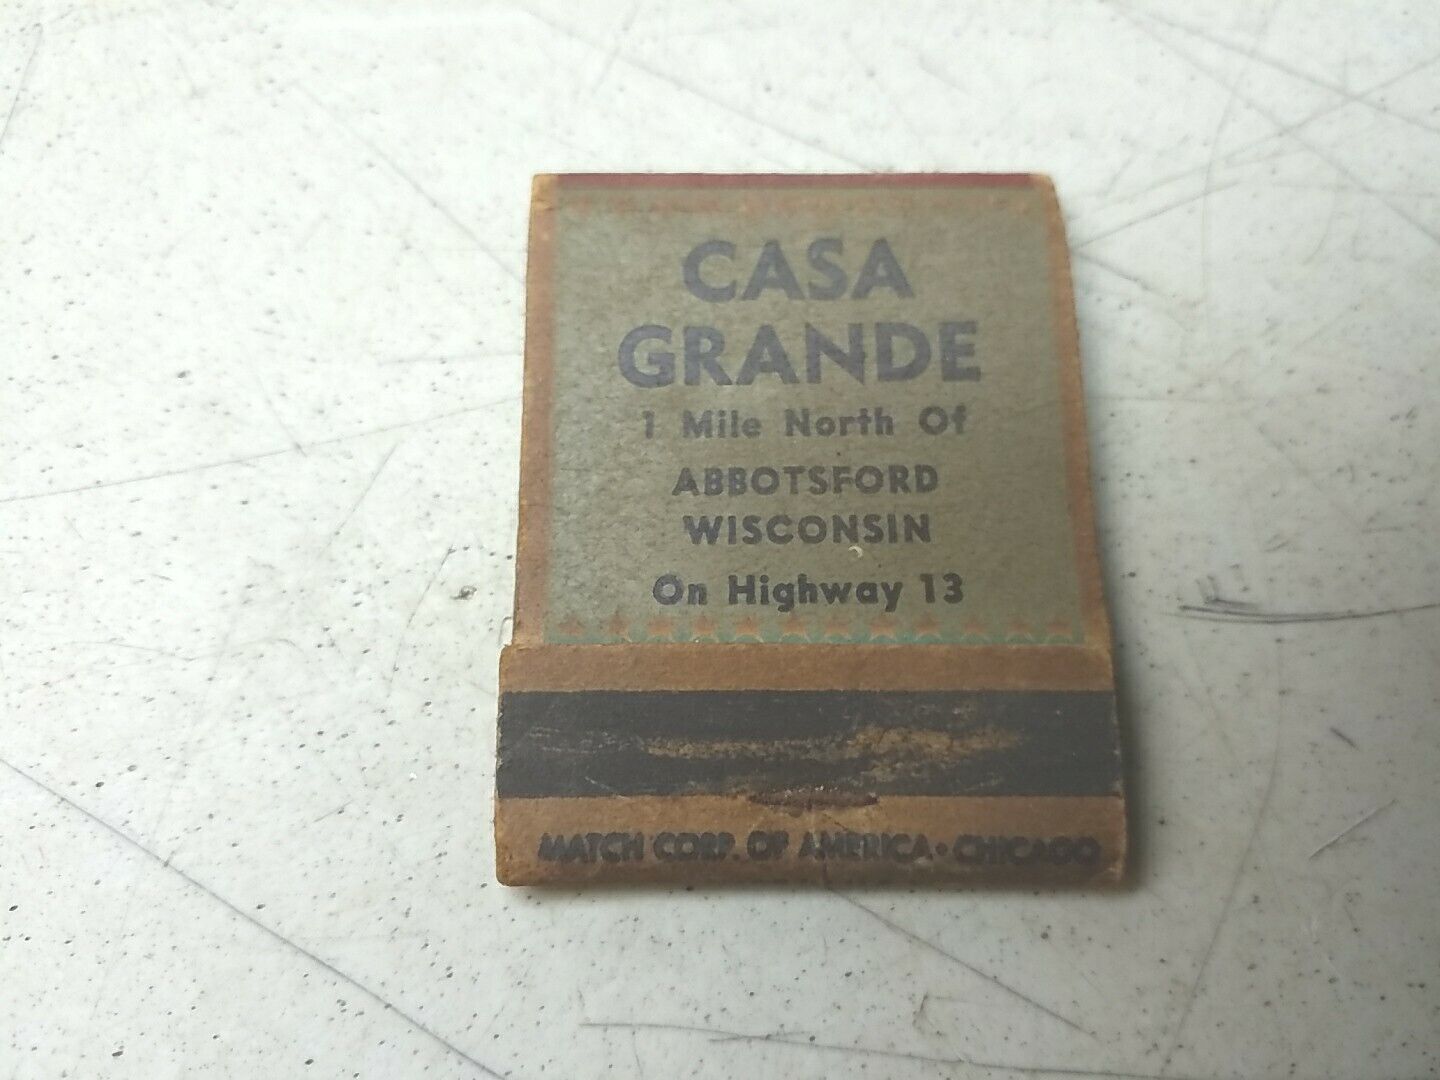 Casa Grande Dining Cocktails Abbotsford Wisconsin Matchbook Cover Advertising 